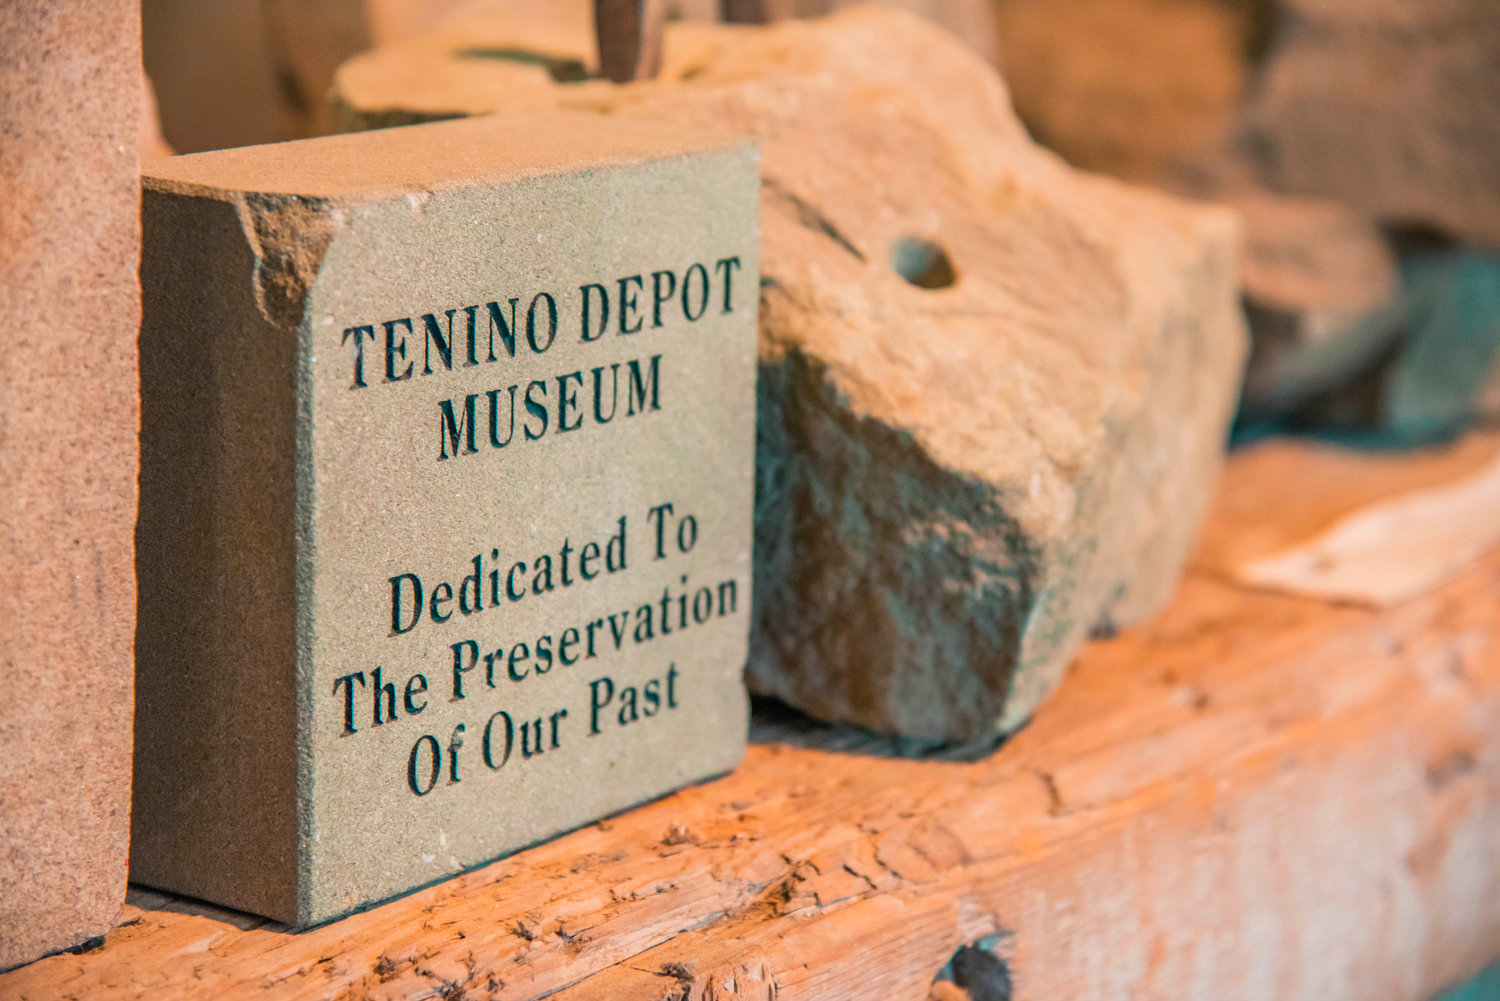 Sandstone is on display inside the Tenino Depot Museum seen Tuesday.